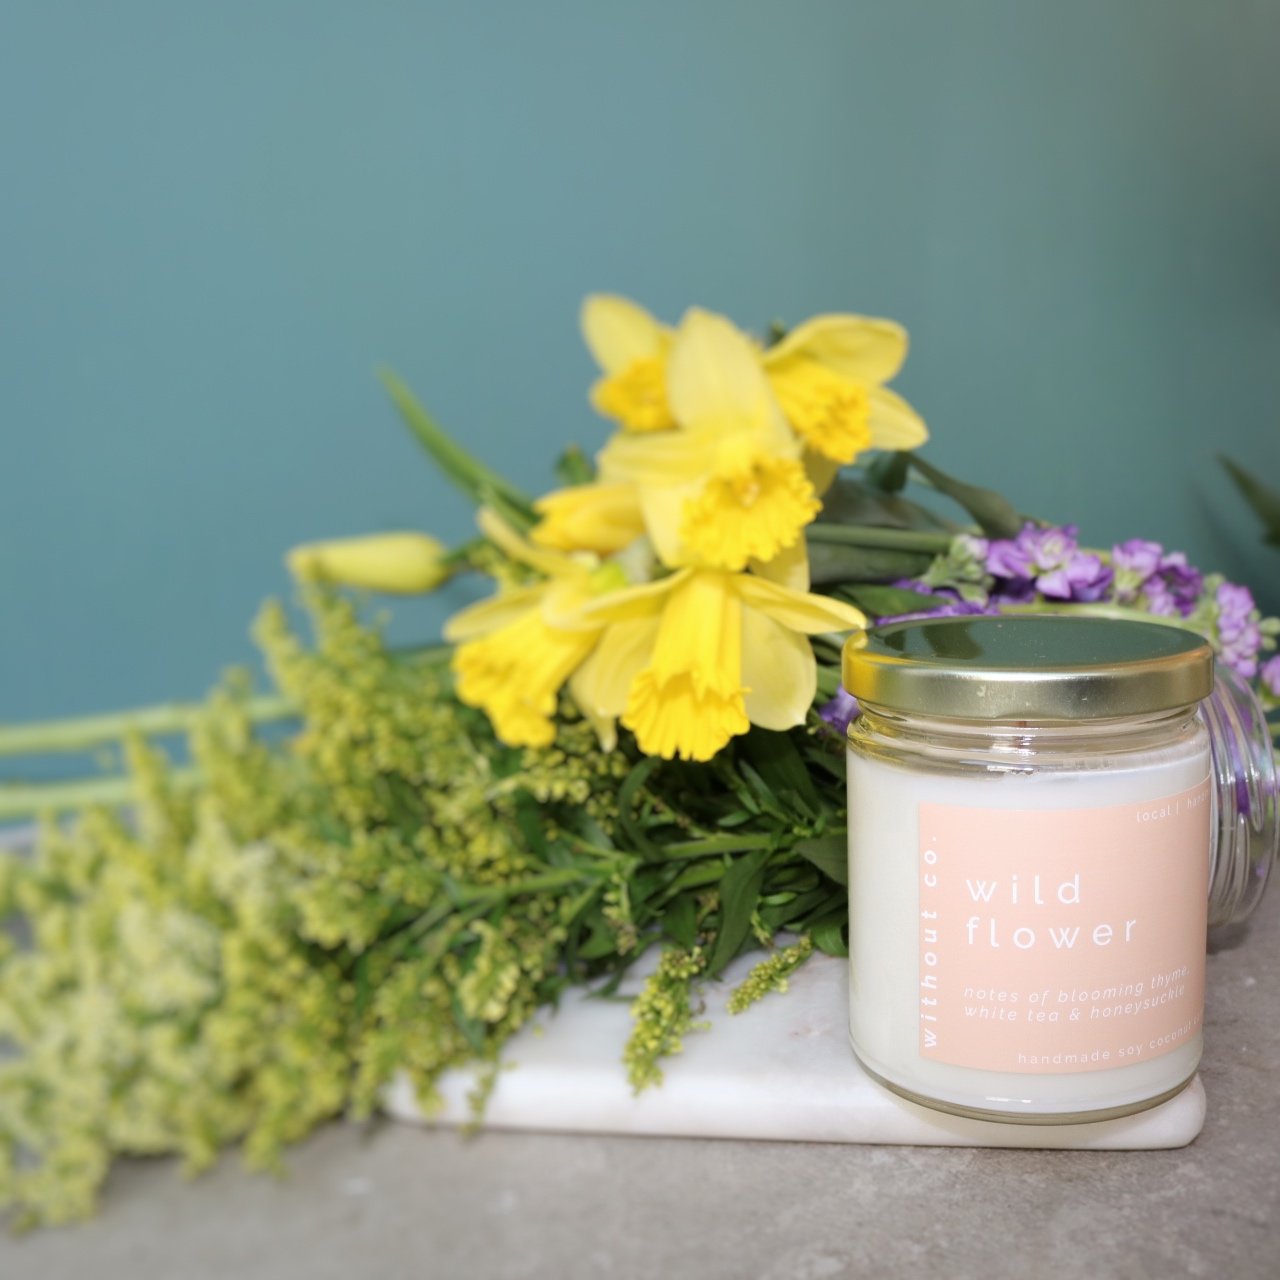 Wildflower candle - lily of the valley, honeysuckle, thyme